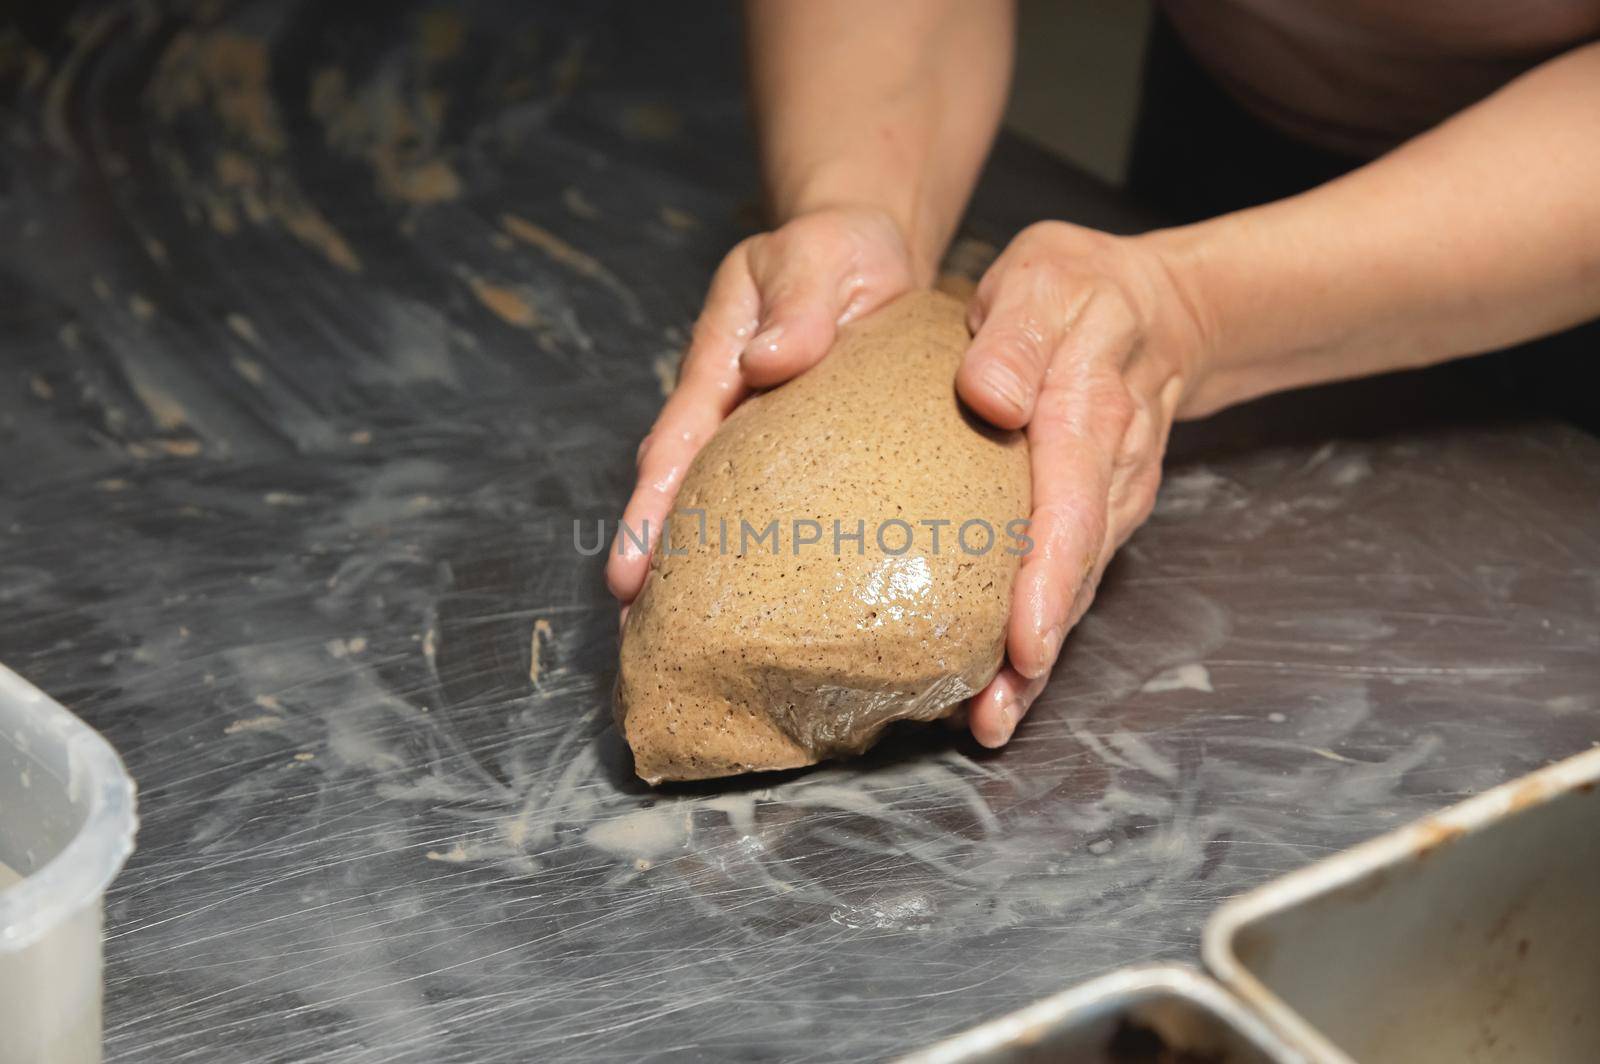 Women's hands carry out actions with raw bread. Dough before dipping into a bakery oven by yanik88